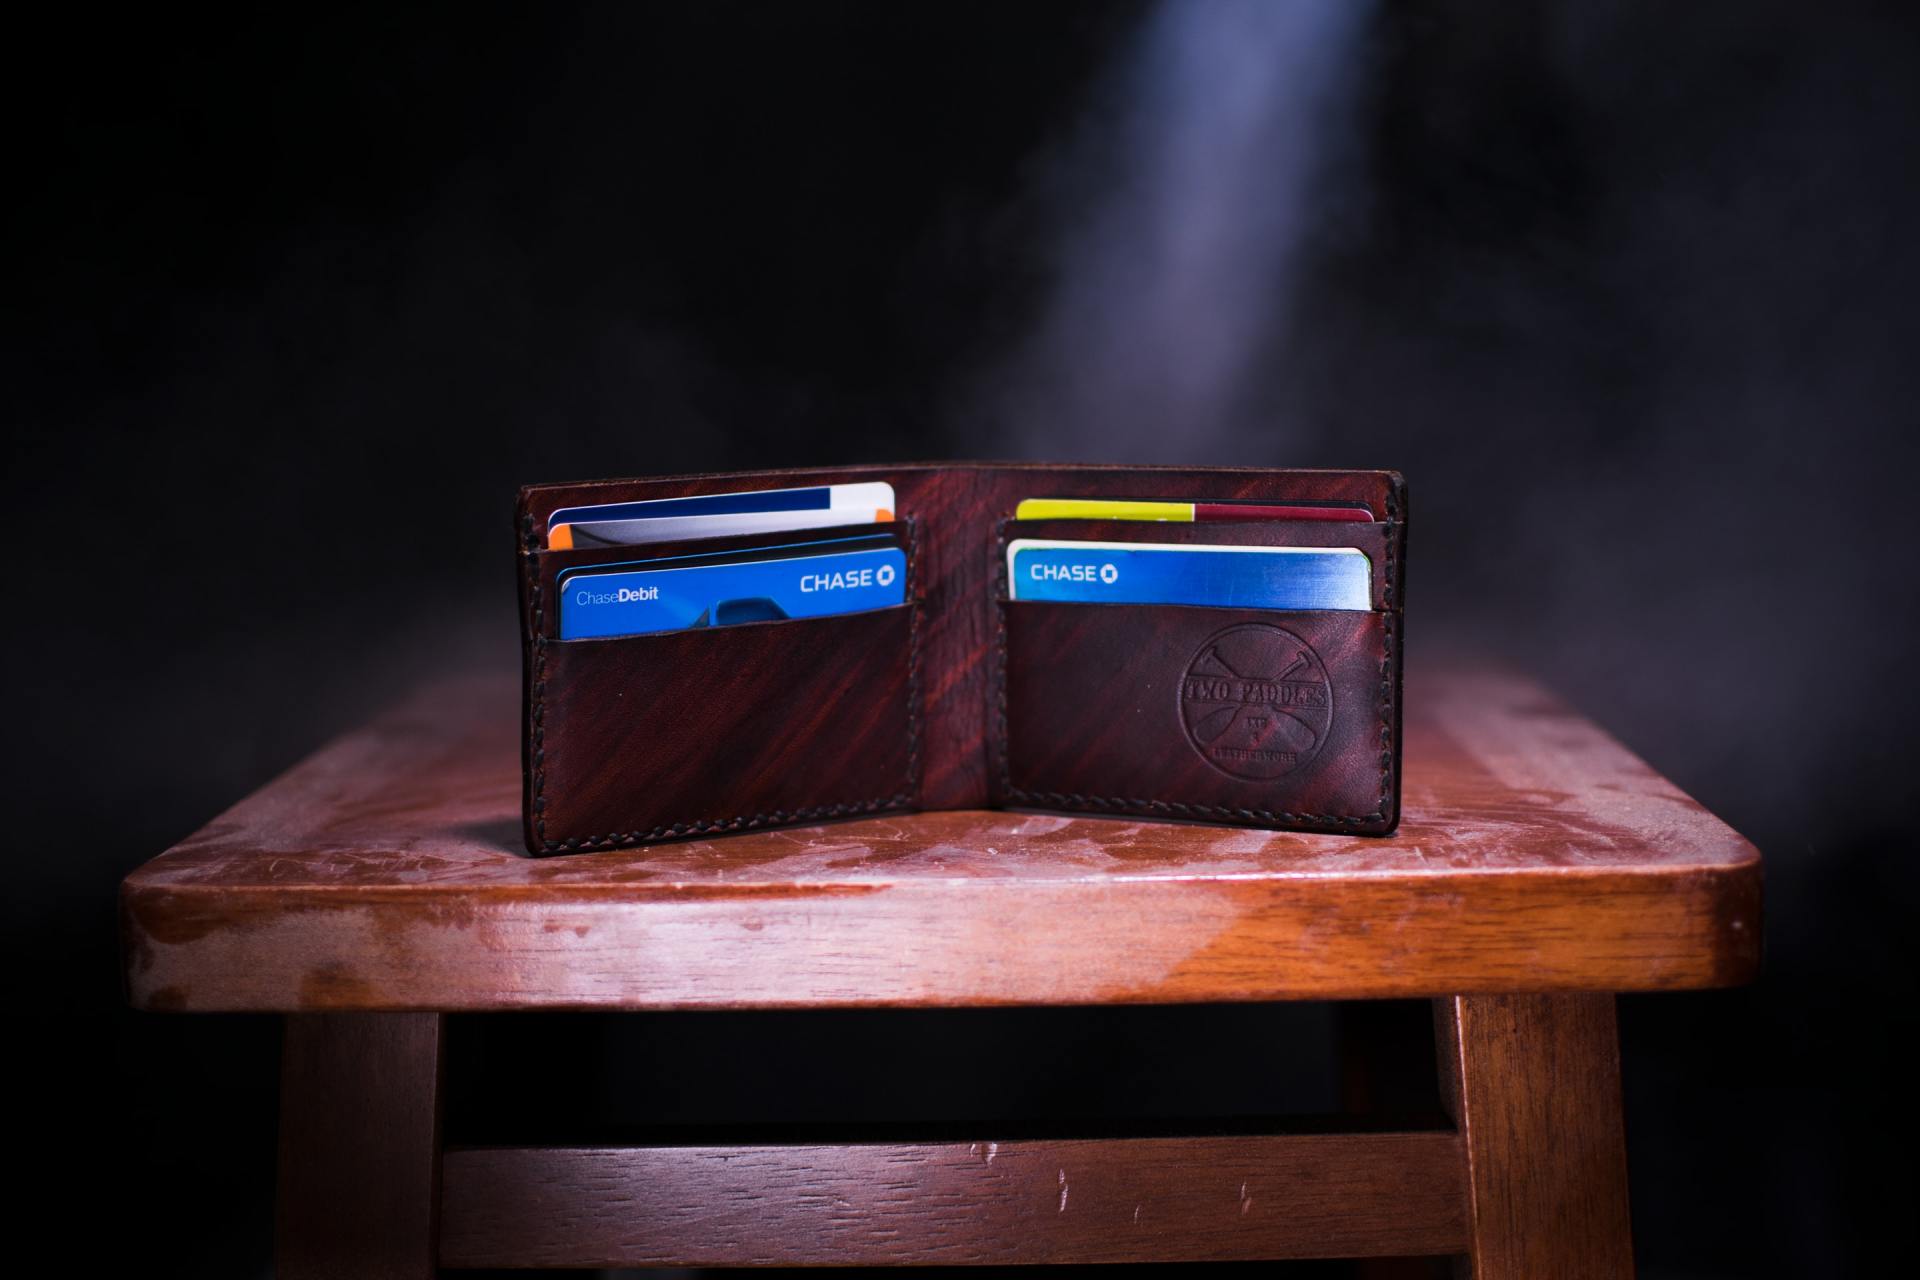 Think your credit card is safe in your wallet? Think again.